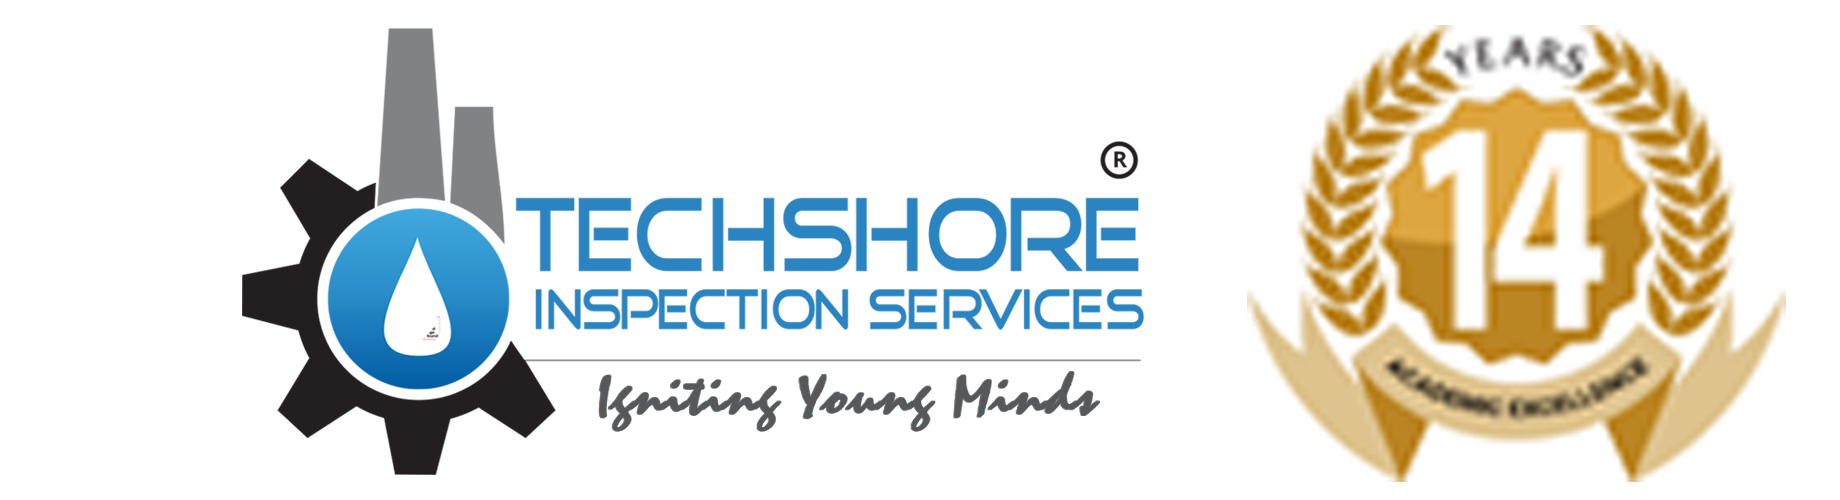 Techshore Inspection Services Logo - Oil and Gas Training Institute